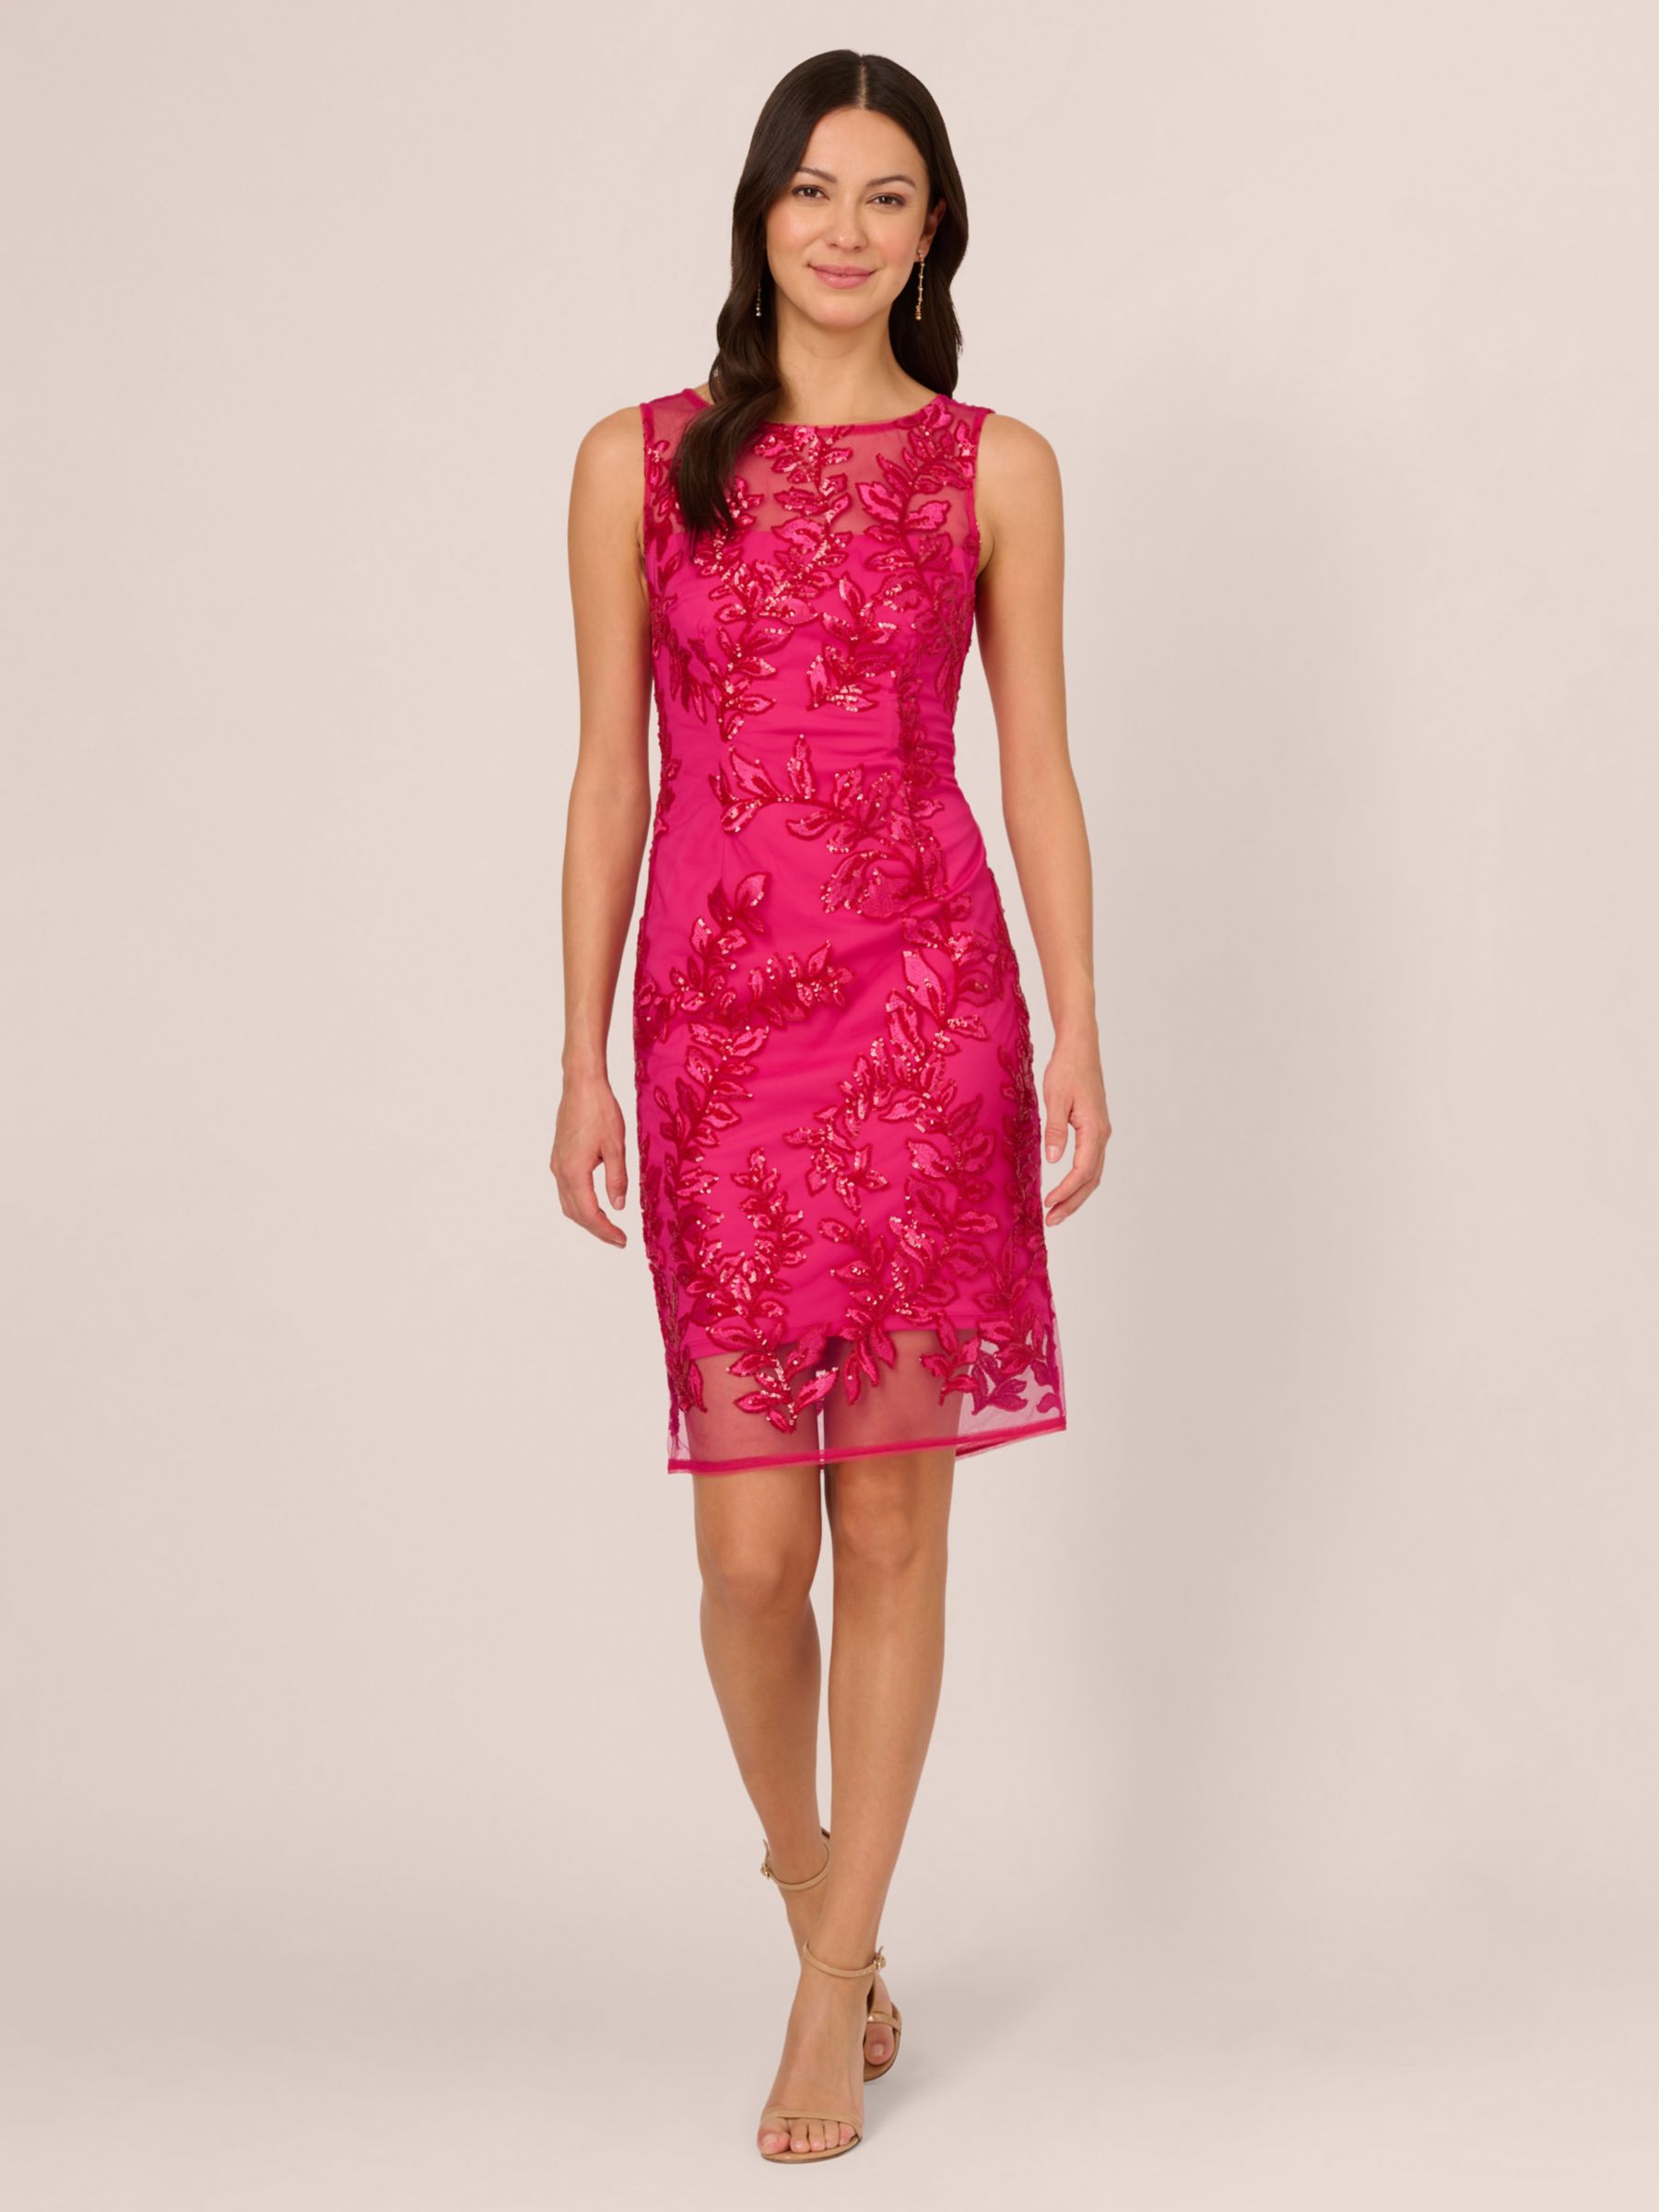 Adrianna Papell Sequin Leaf Sheath Dress, Hot Pink, 6